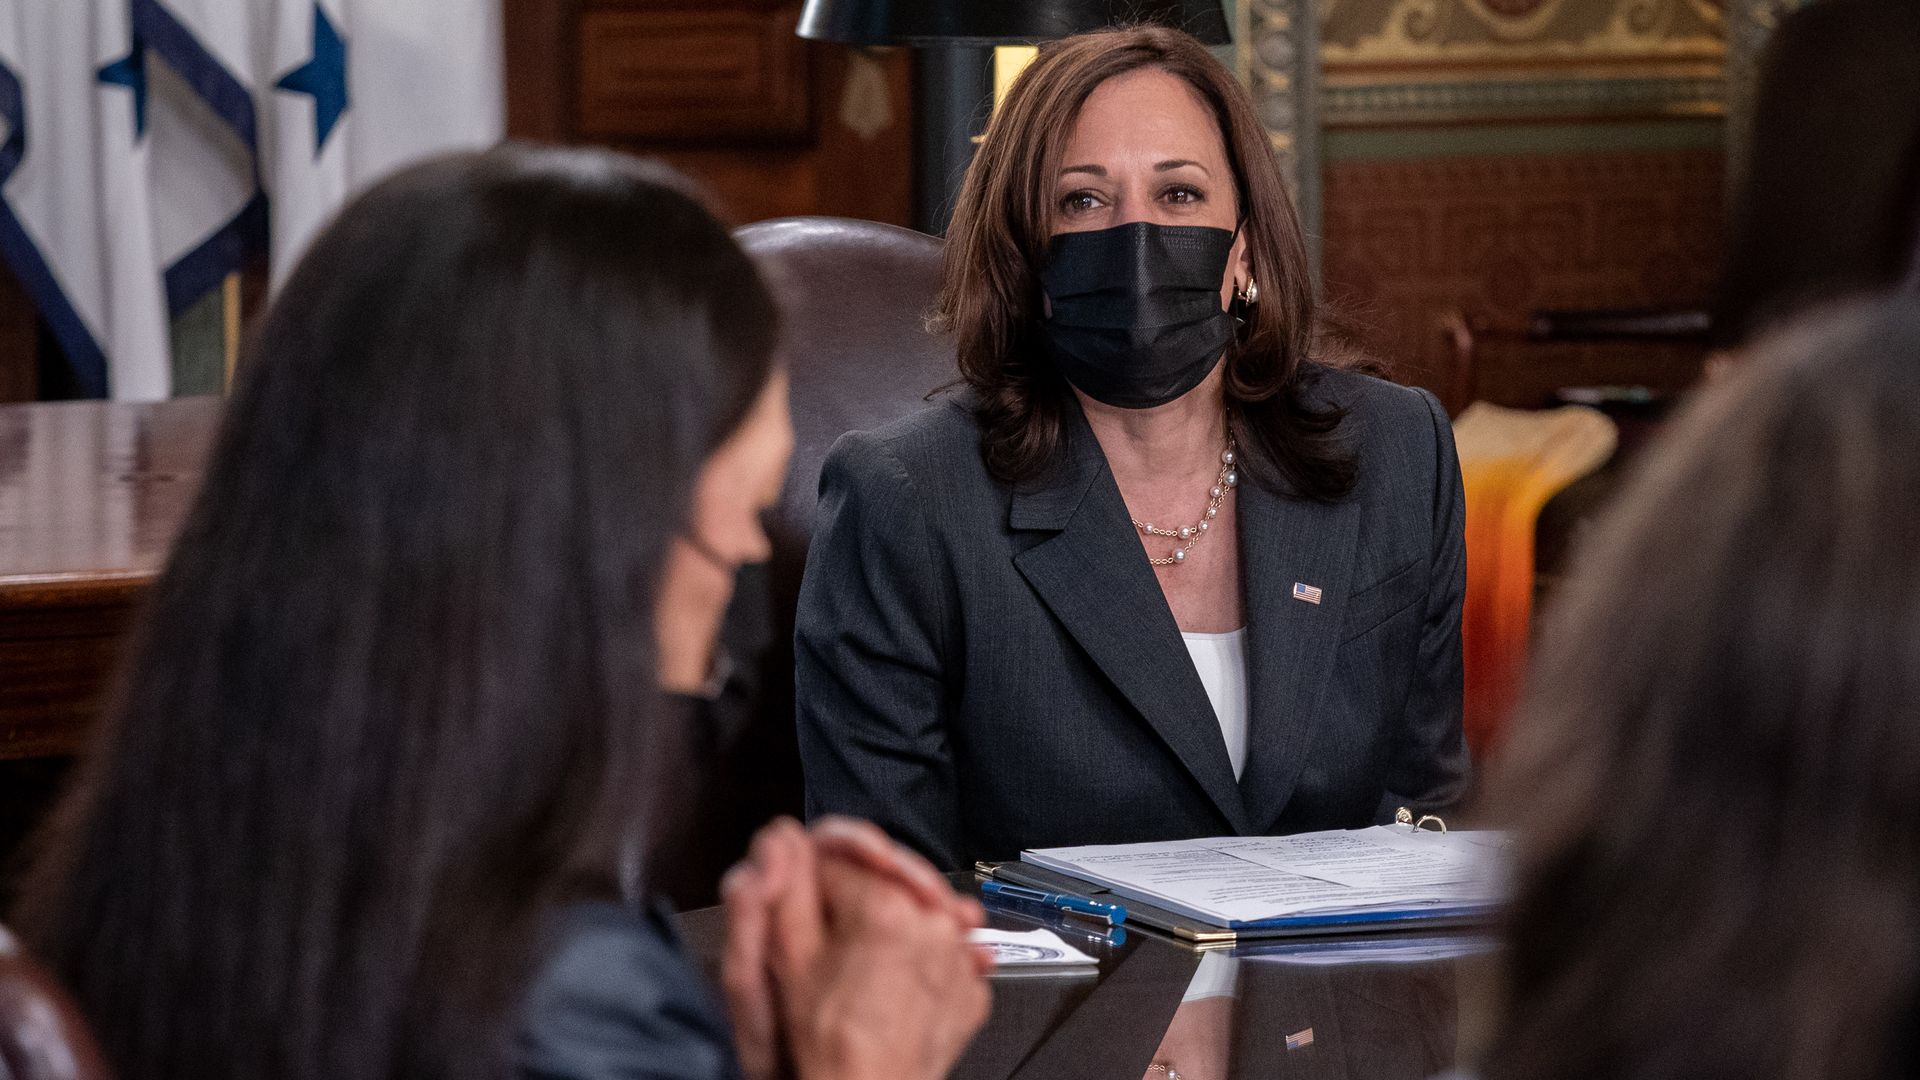 Vice President Kamala Harris is seen wearing a mask during a meeting on Tuesday.